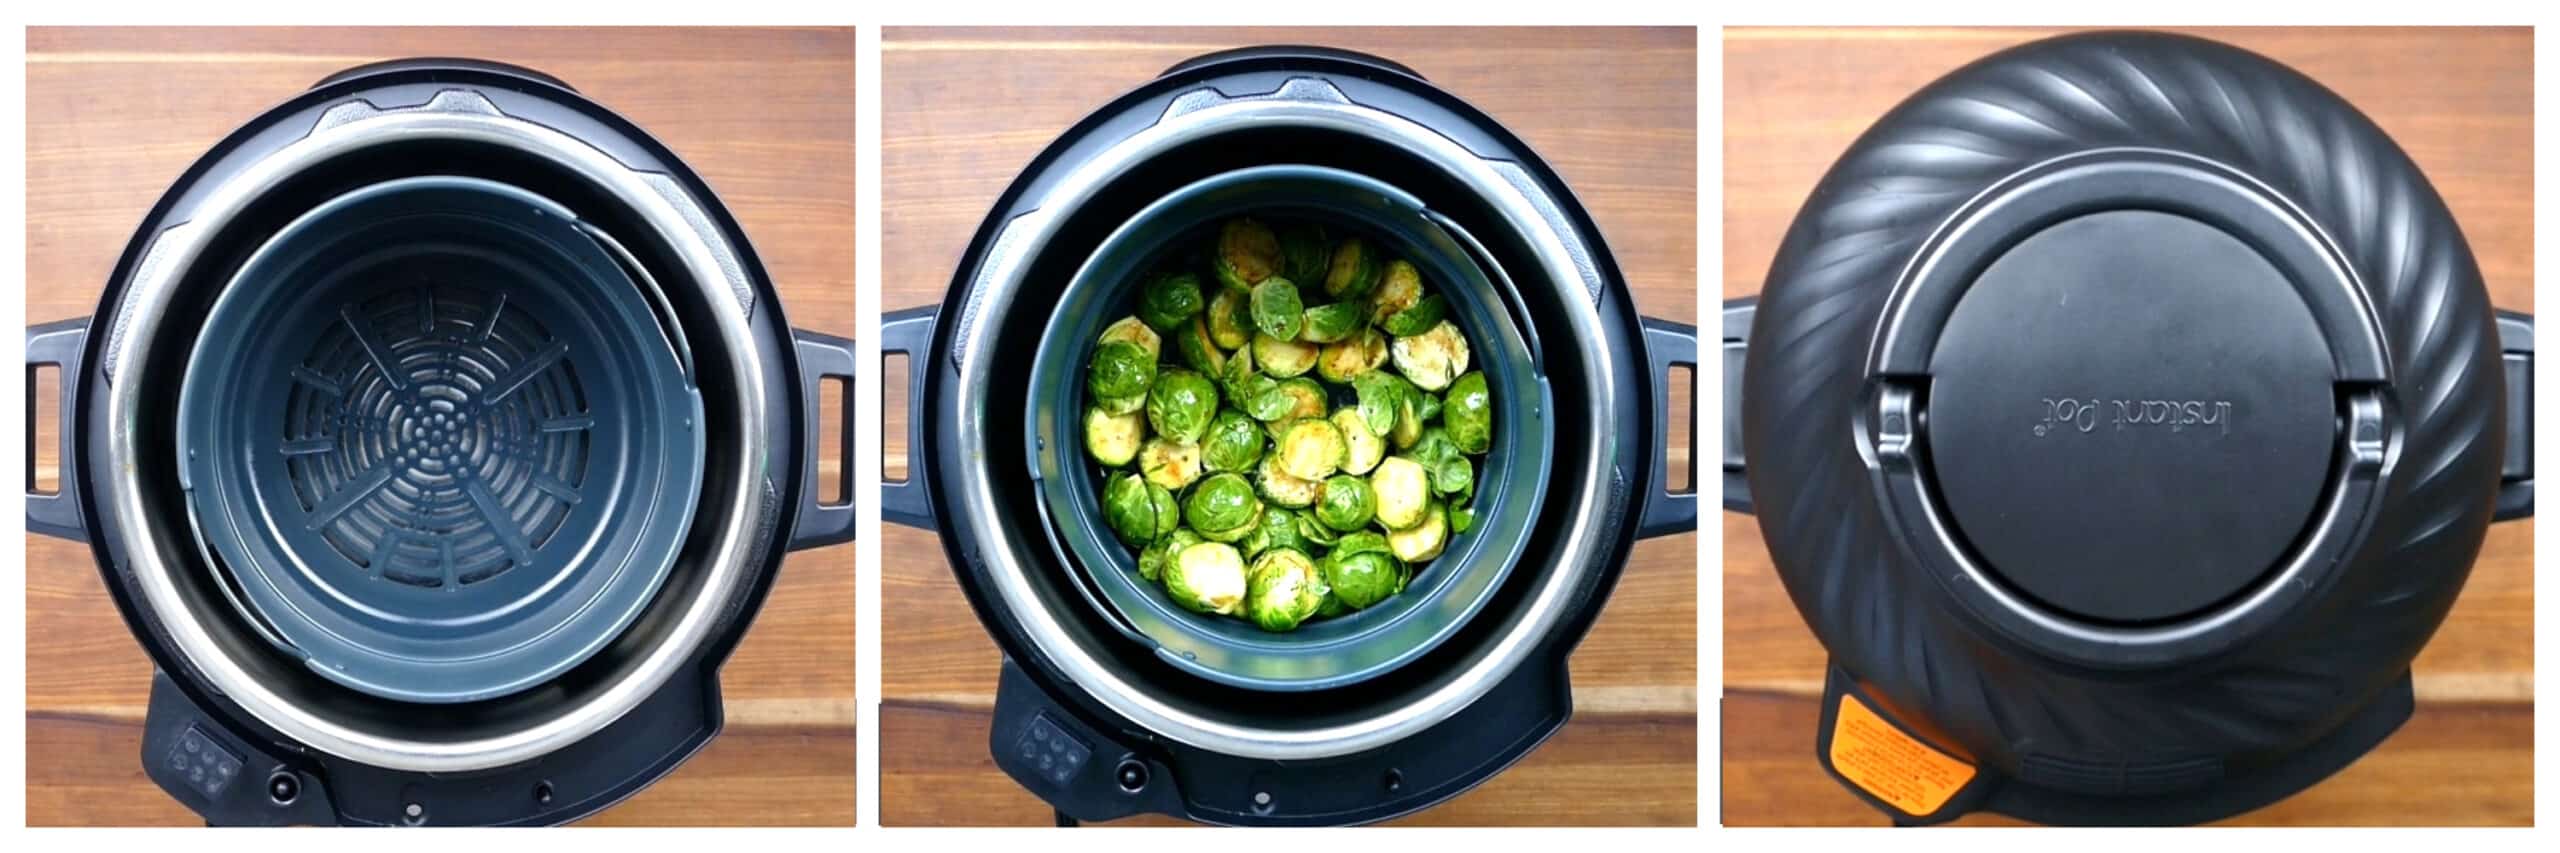 Air fryer brussel sprouts collage - empty basket, brussel sprouts in basket, air fryer lid is on